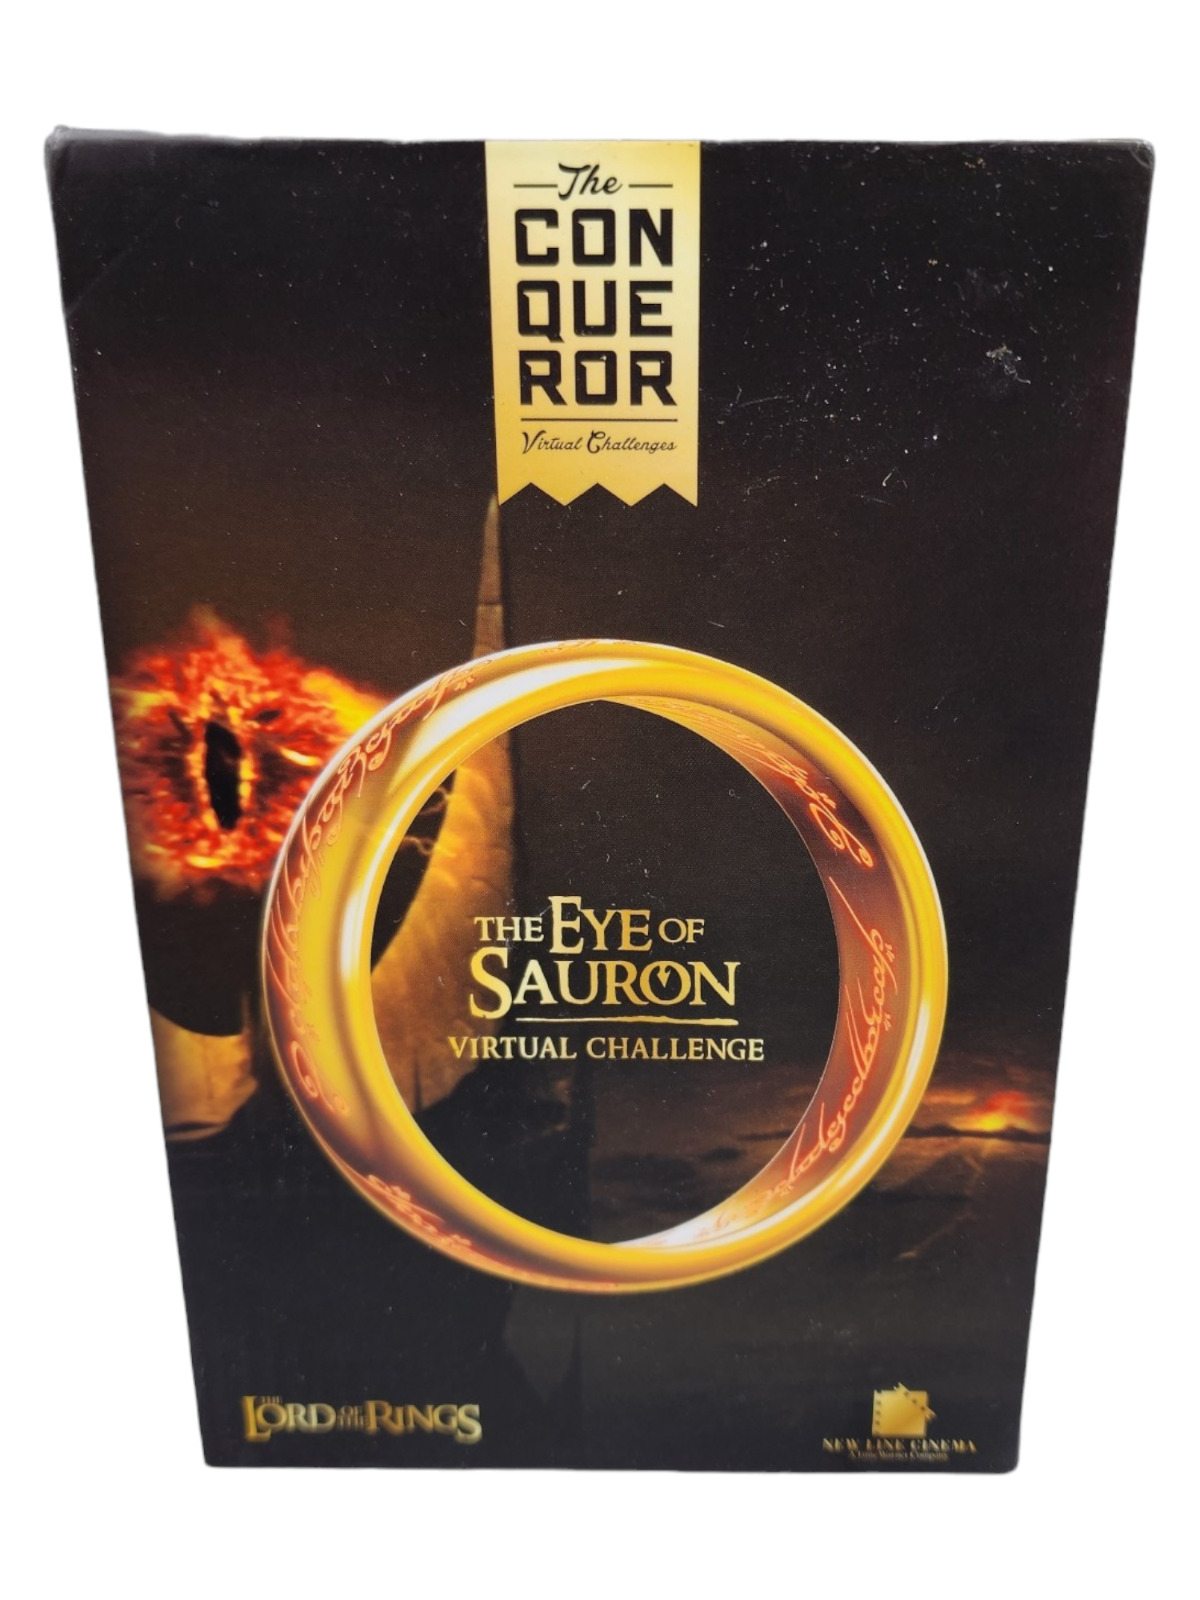 THE CONQUEROR THE EYE OF SAURON VIRTUAL CHALLENGE THE LORD OF THE RINGS NEW